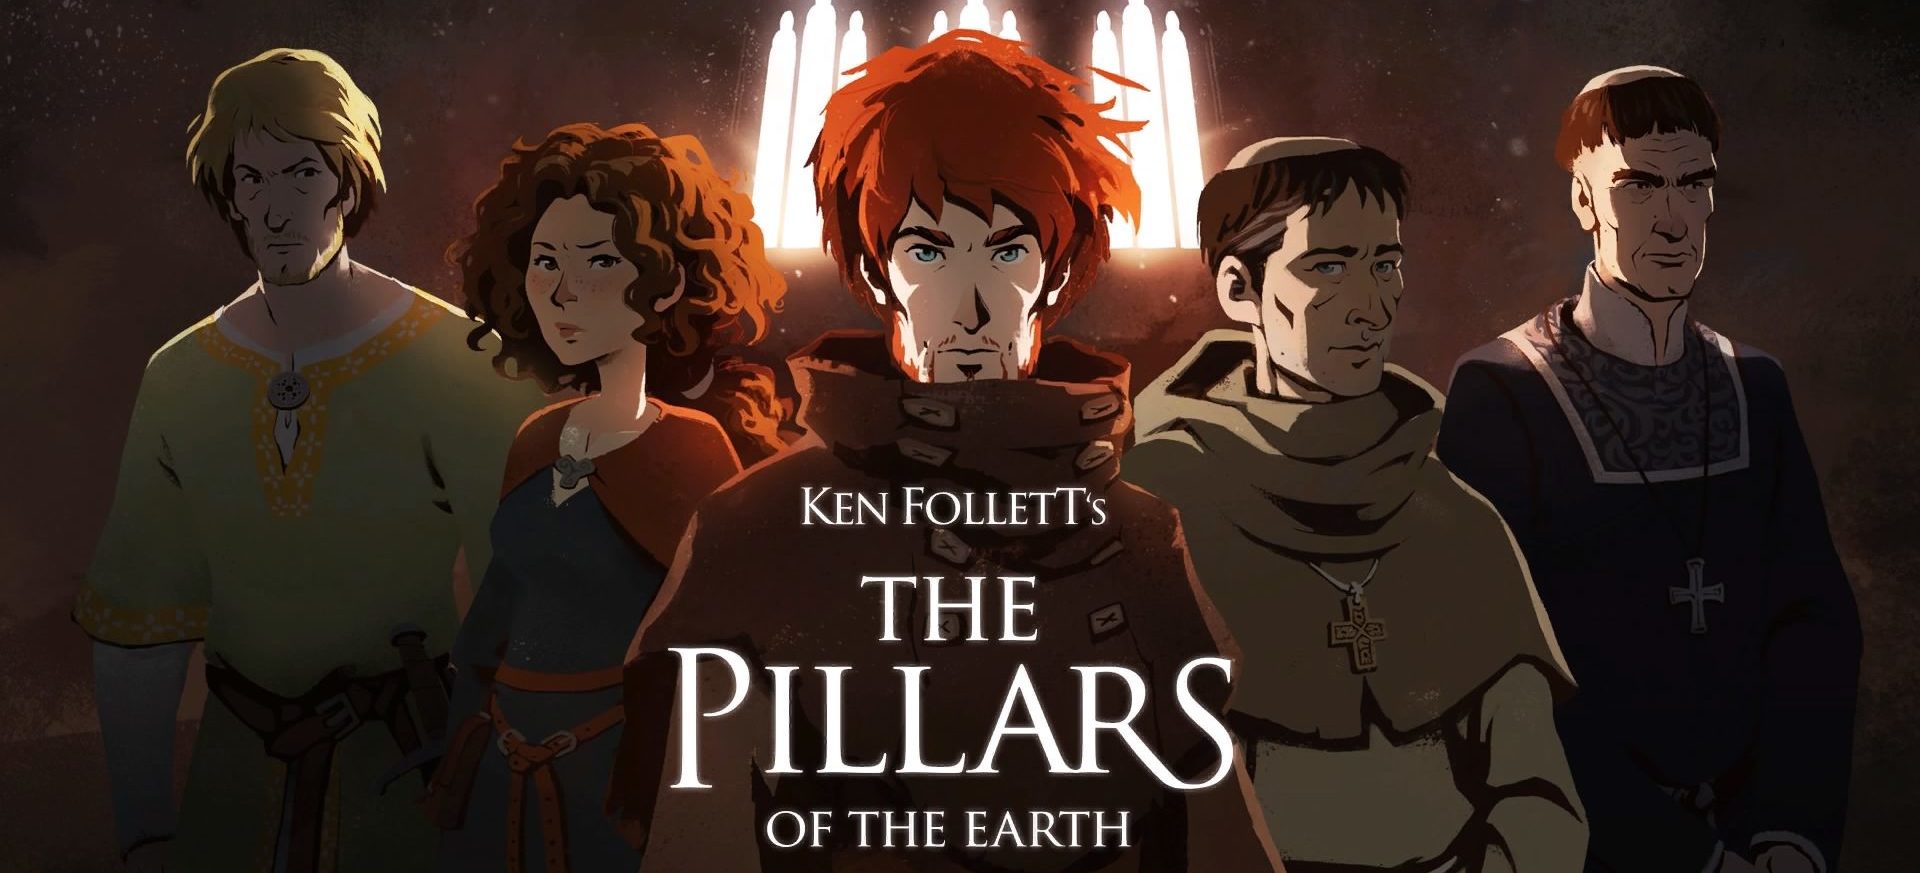  The Pillars of the Earth (PS4) : Video Games